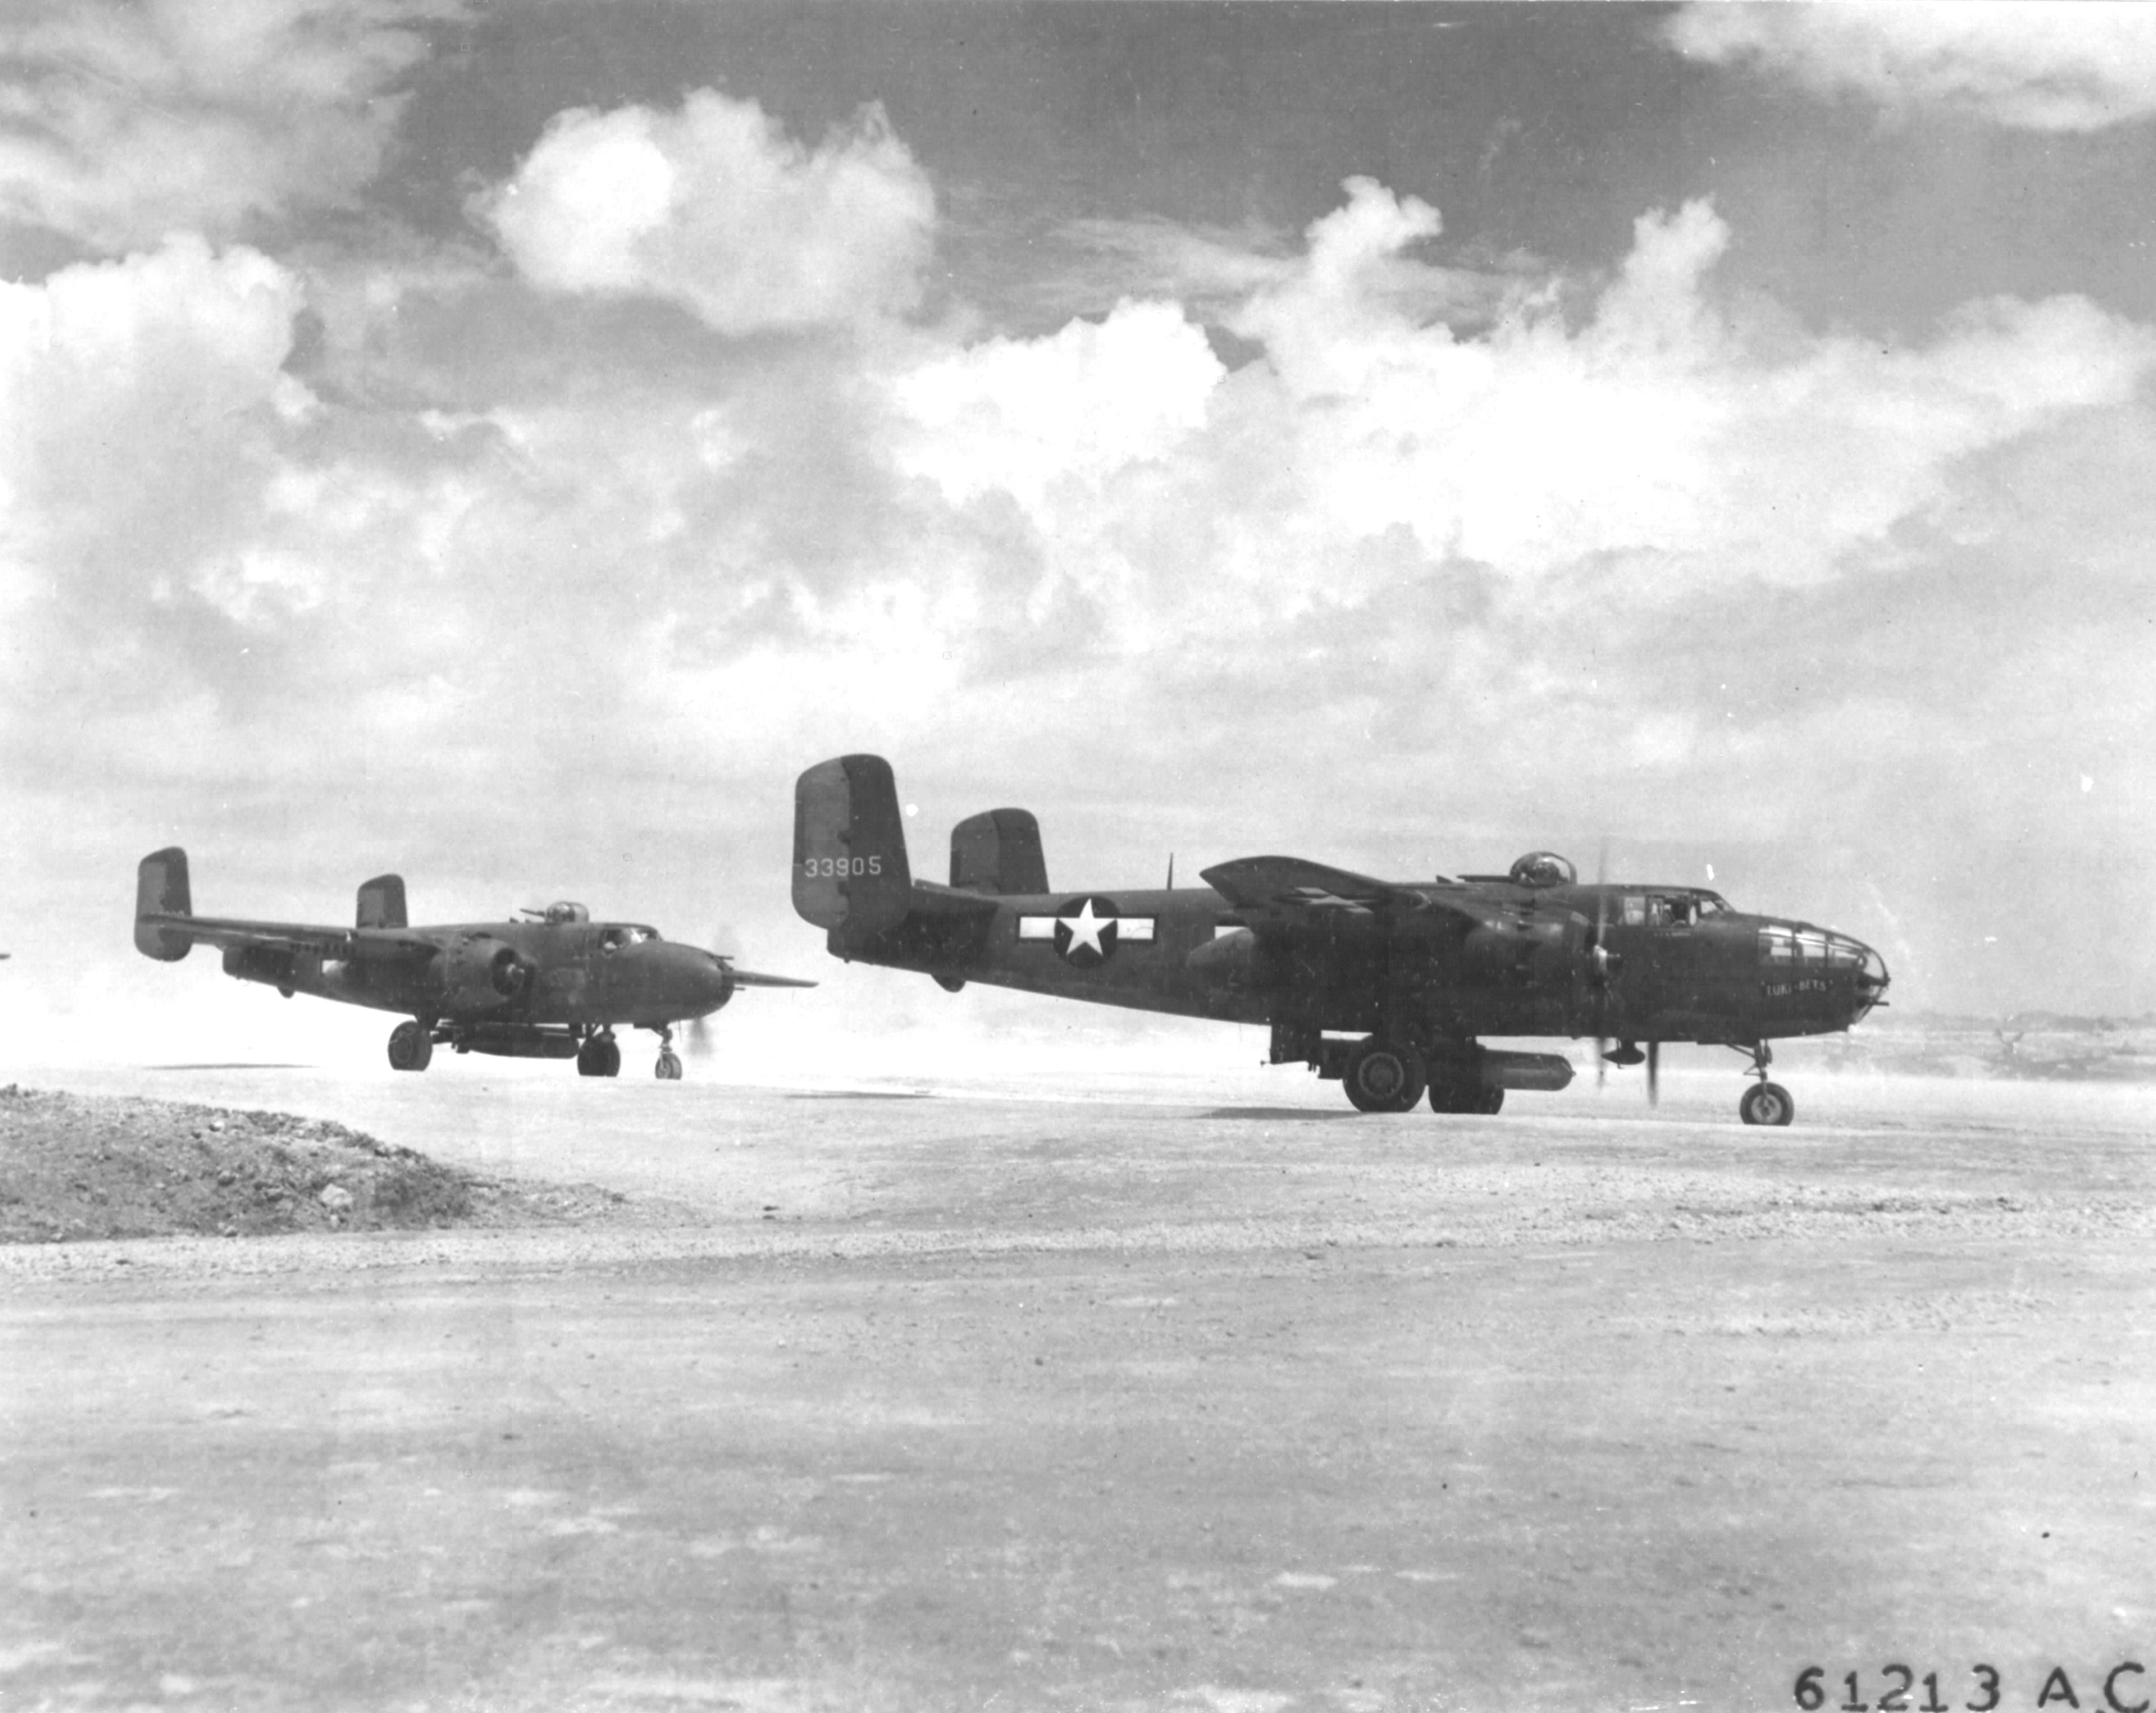 B-25J Mitchell bombers of the 41st Bomb Group armed with Mark XIII torpedoes prepare for take-off from Yonton Airfield, Okinawa bound for an attack on Japanese shipping at Sasebo, Japan, 28 Jul 1945.